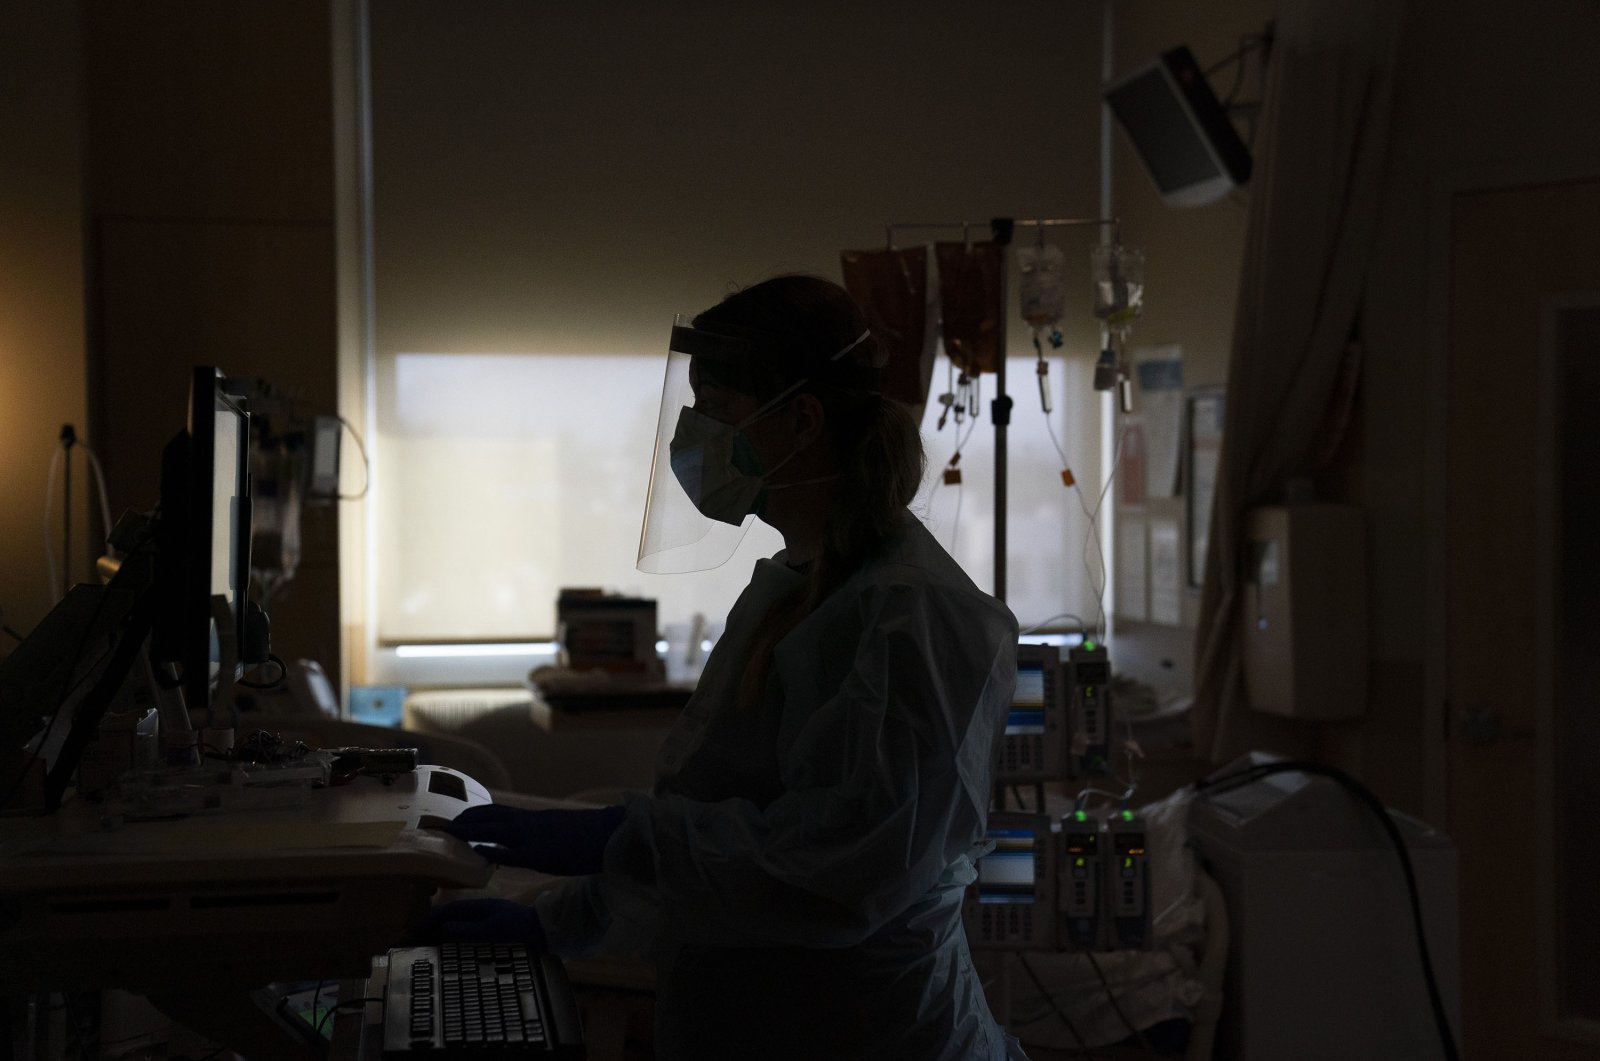 Registered nurse Virginia Petersen works on a computer while assisting a COVID-19 patient at Providence Holy Cross Medical Center in the Mission Hills section of Los Angeles, Nov. 19, 2020. (AP Photo)